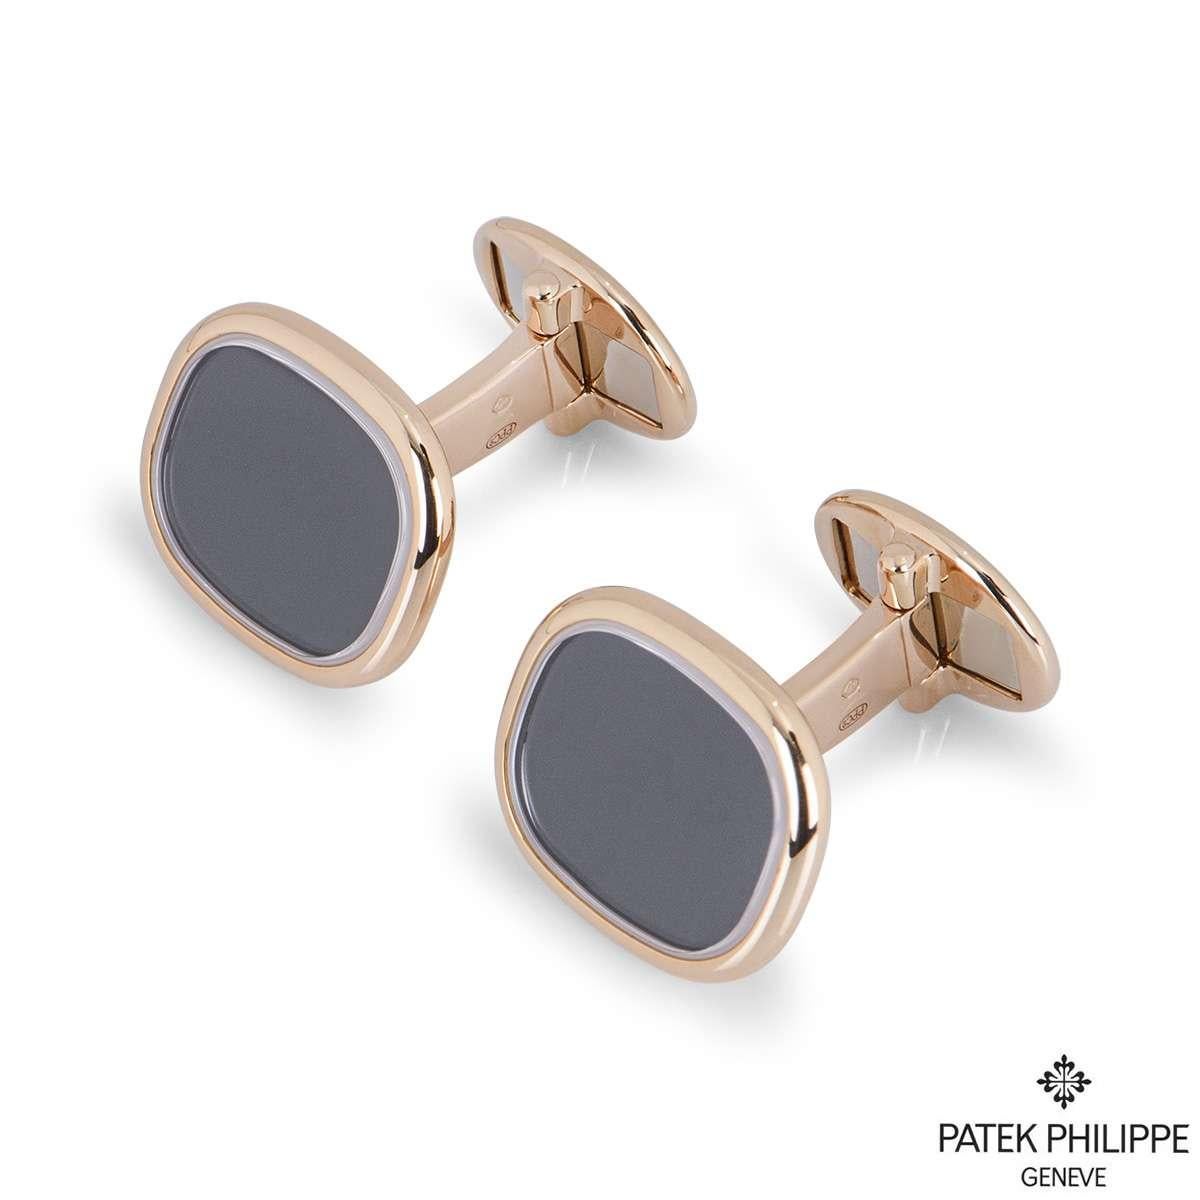 A pair of 18k rose gold Ellipse cufflinks by Patek Philippe. Each cufflink is set to the front with an ebony black sunburst dial with a polished rose gold surround, measuring 14mm in height and 16mm in width. The cufflinks have T-bar fittings and